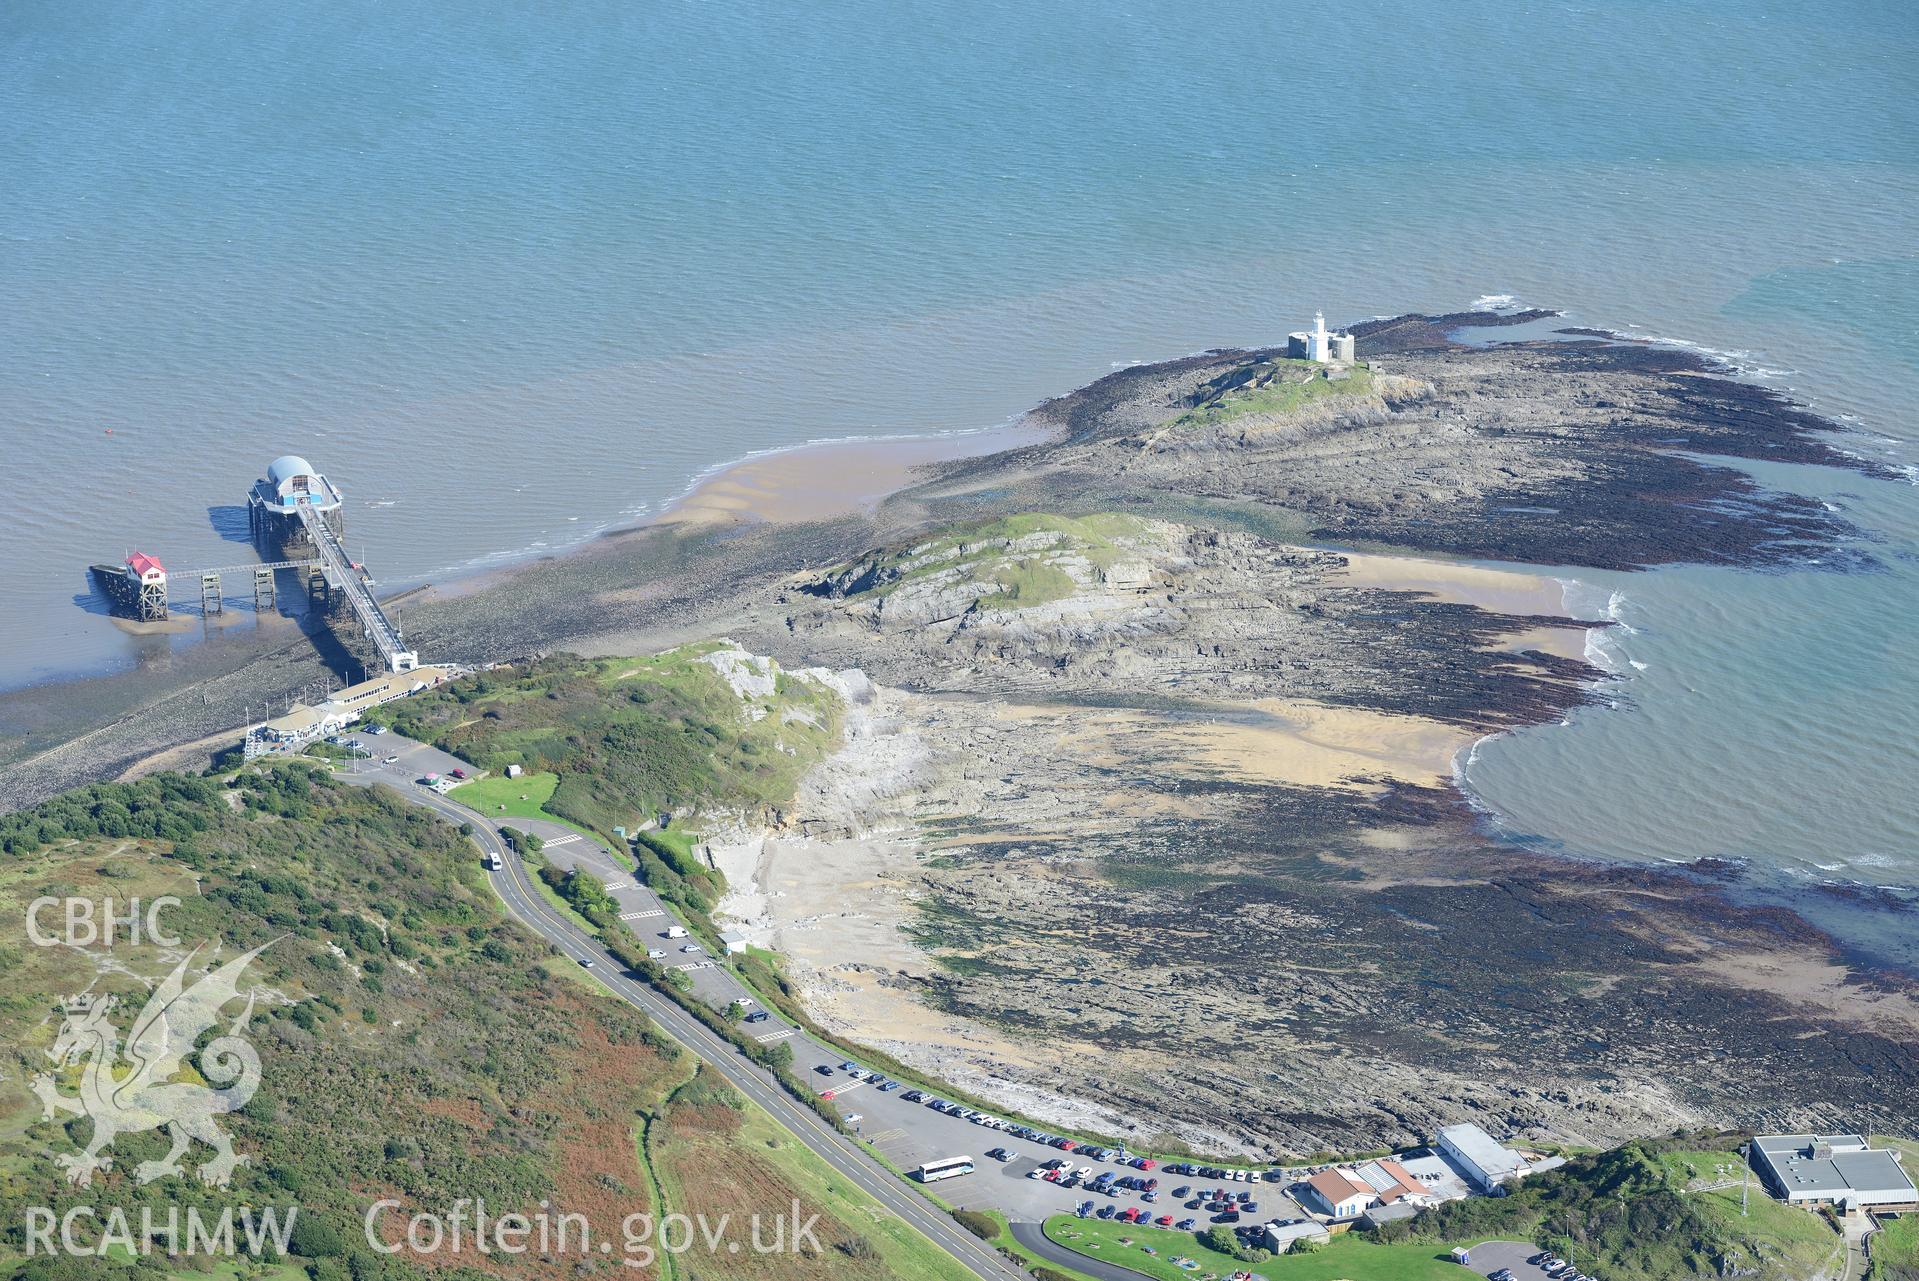 Mumbles fort, pier, coastguard station and lighthouse at the south western edge of Swansea Bay. Oblique aerial photograph taken during the Royal Commission's programme of archaeological aerial reconnaissance by Toby Driver on 30th September 2015.